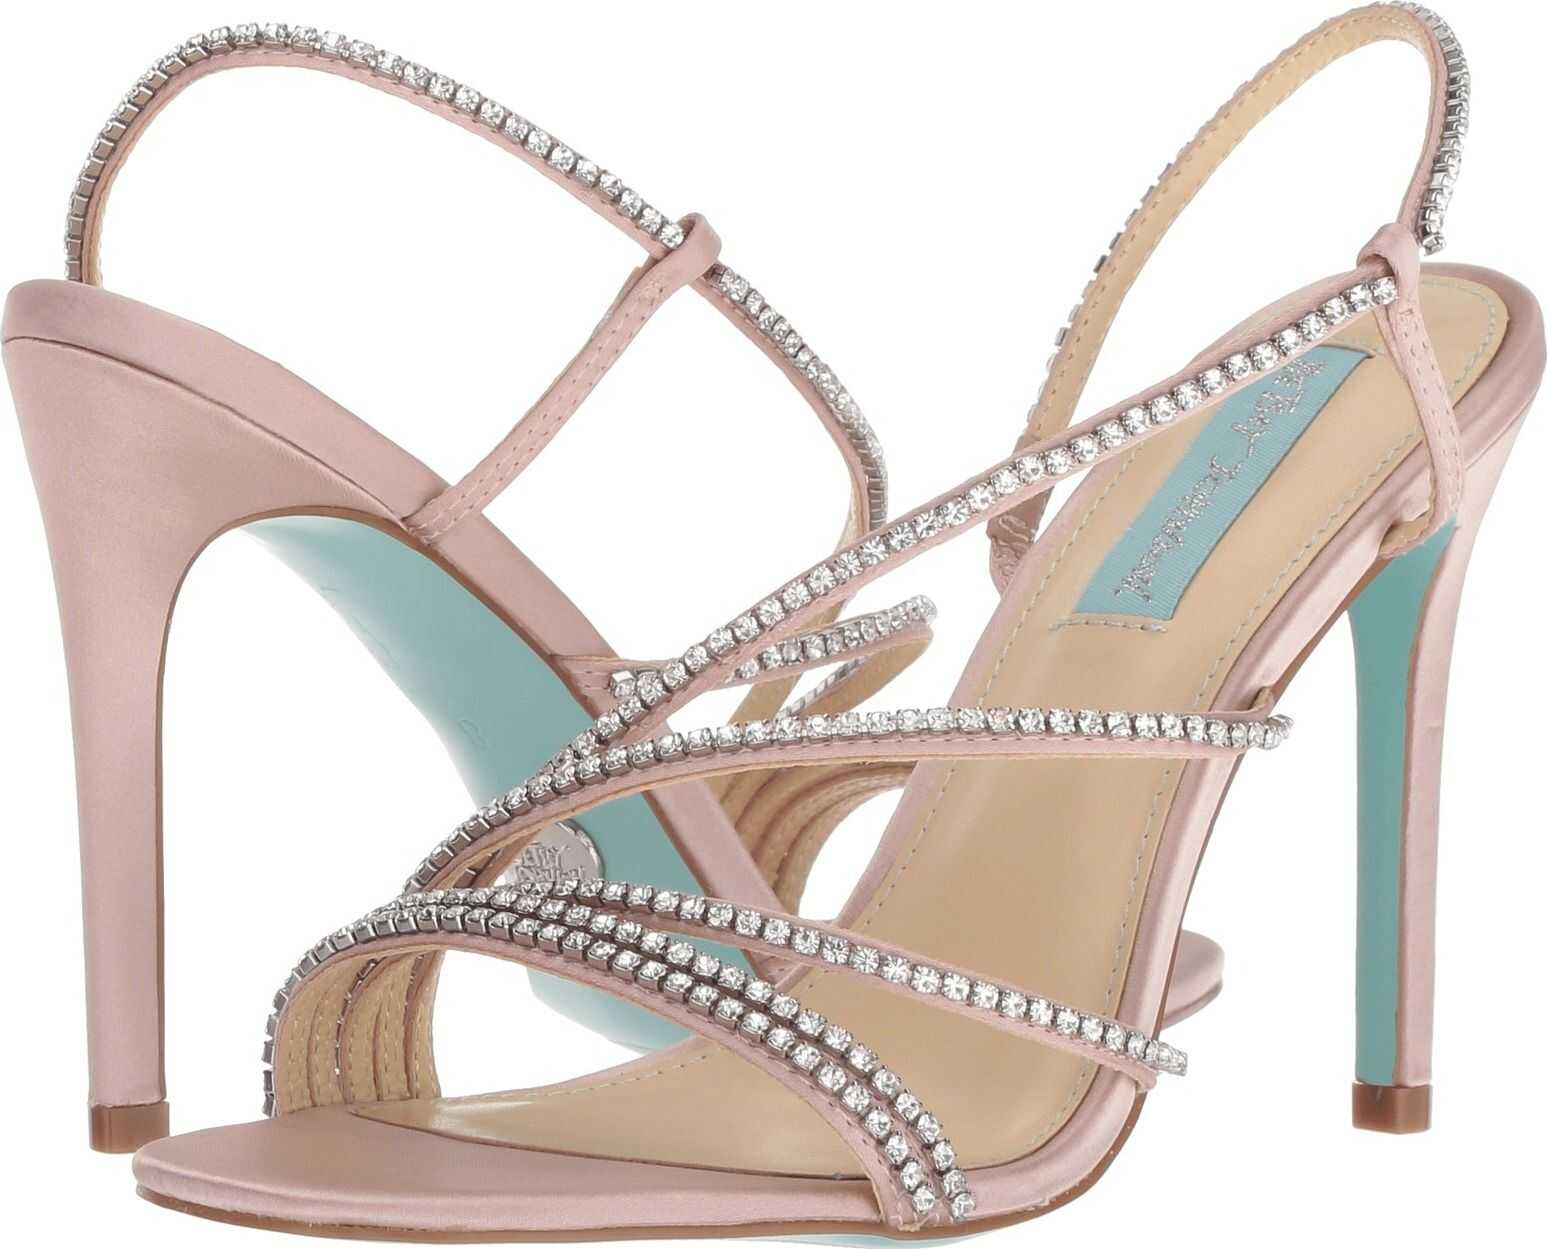 Blue by Betsey Johnson Aces* Nude Satin